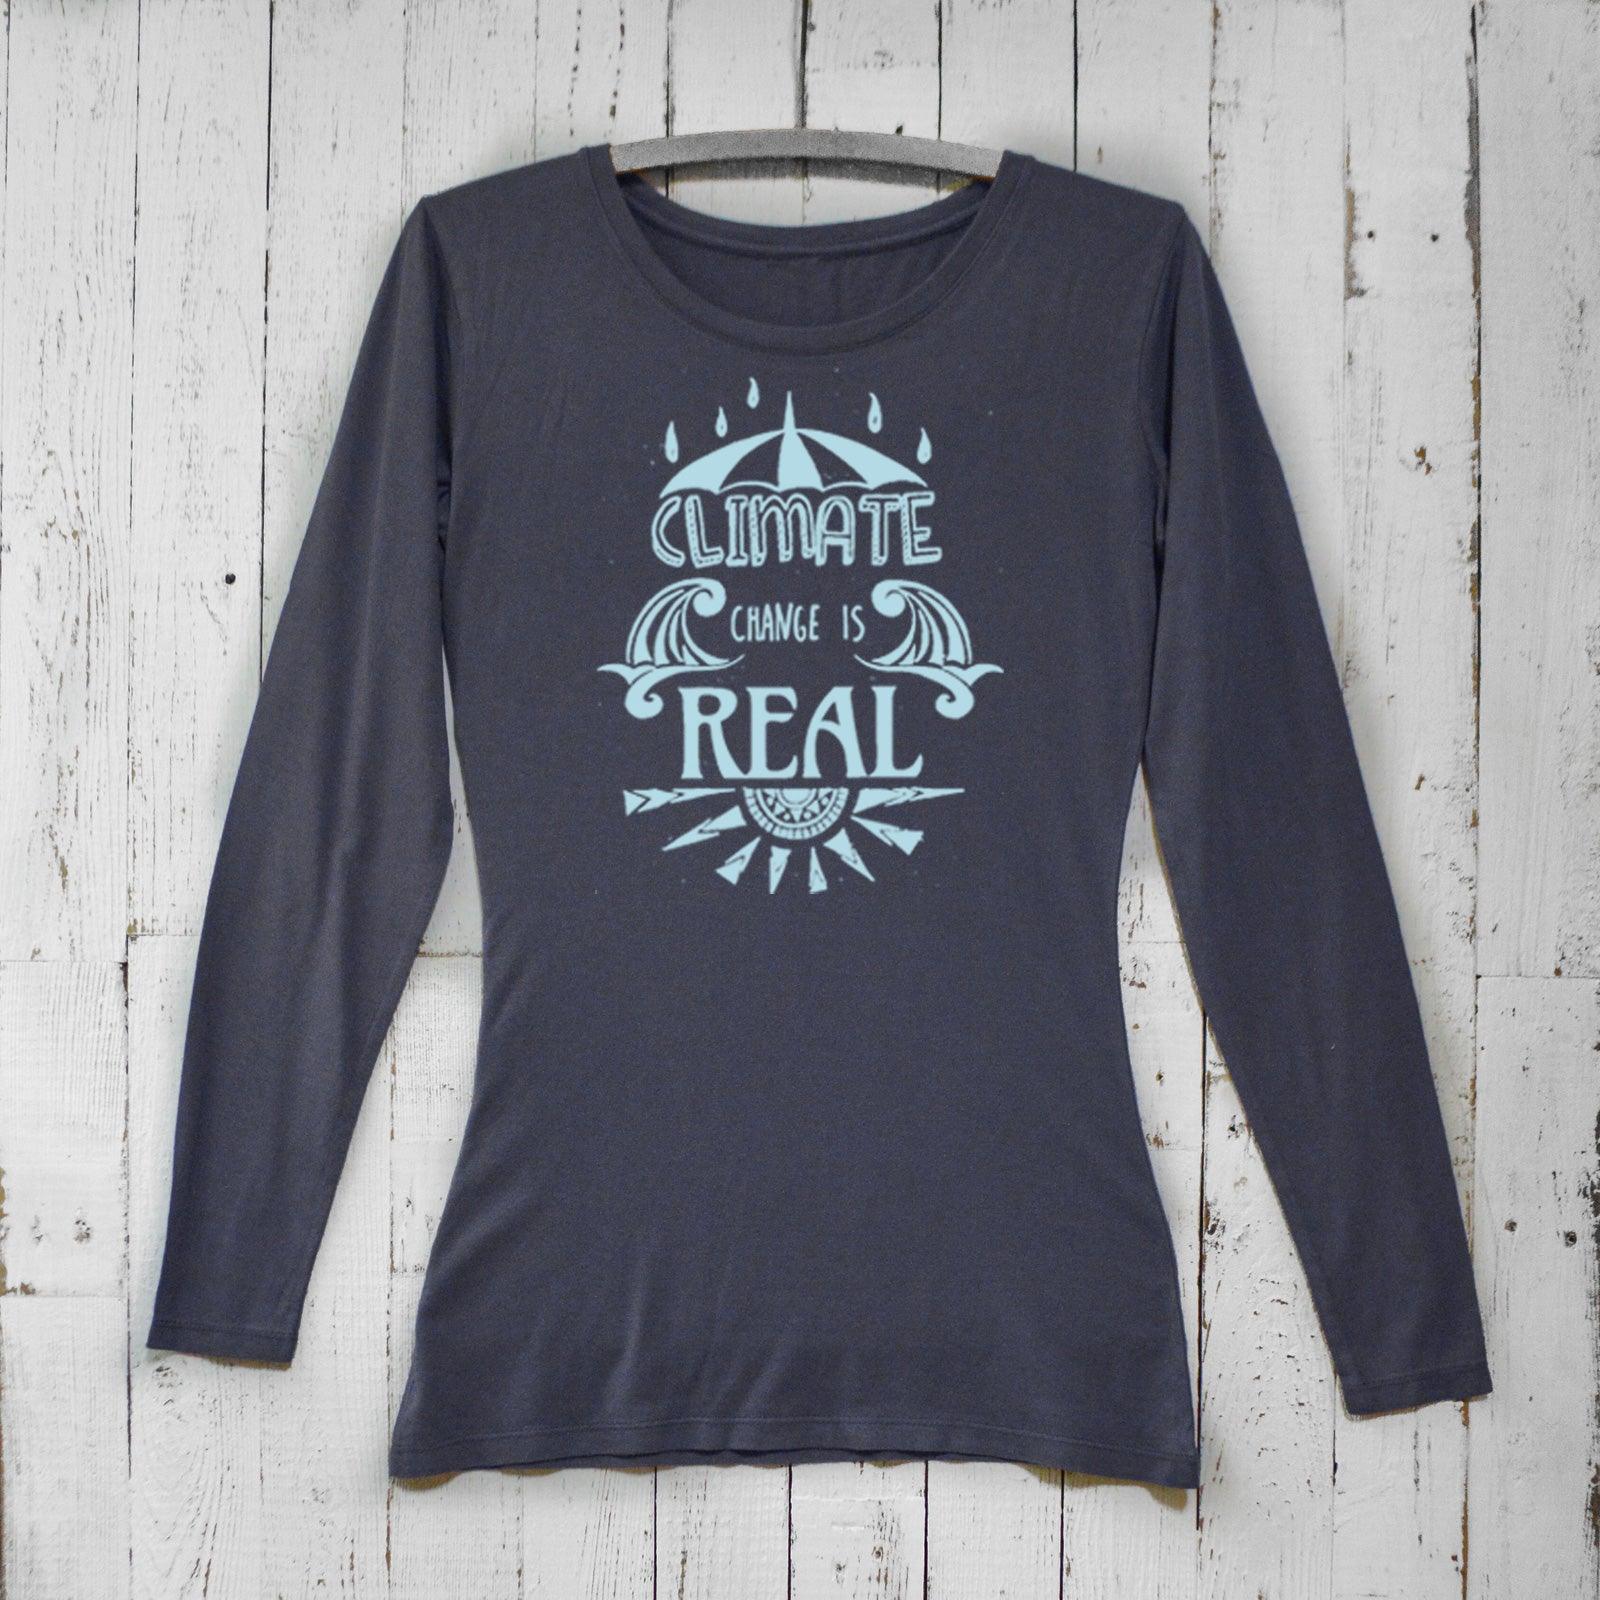 Climate Change Is Real, Long Sleeve T-shirt for Women Uni-T